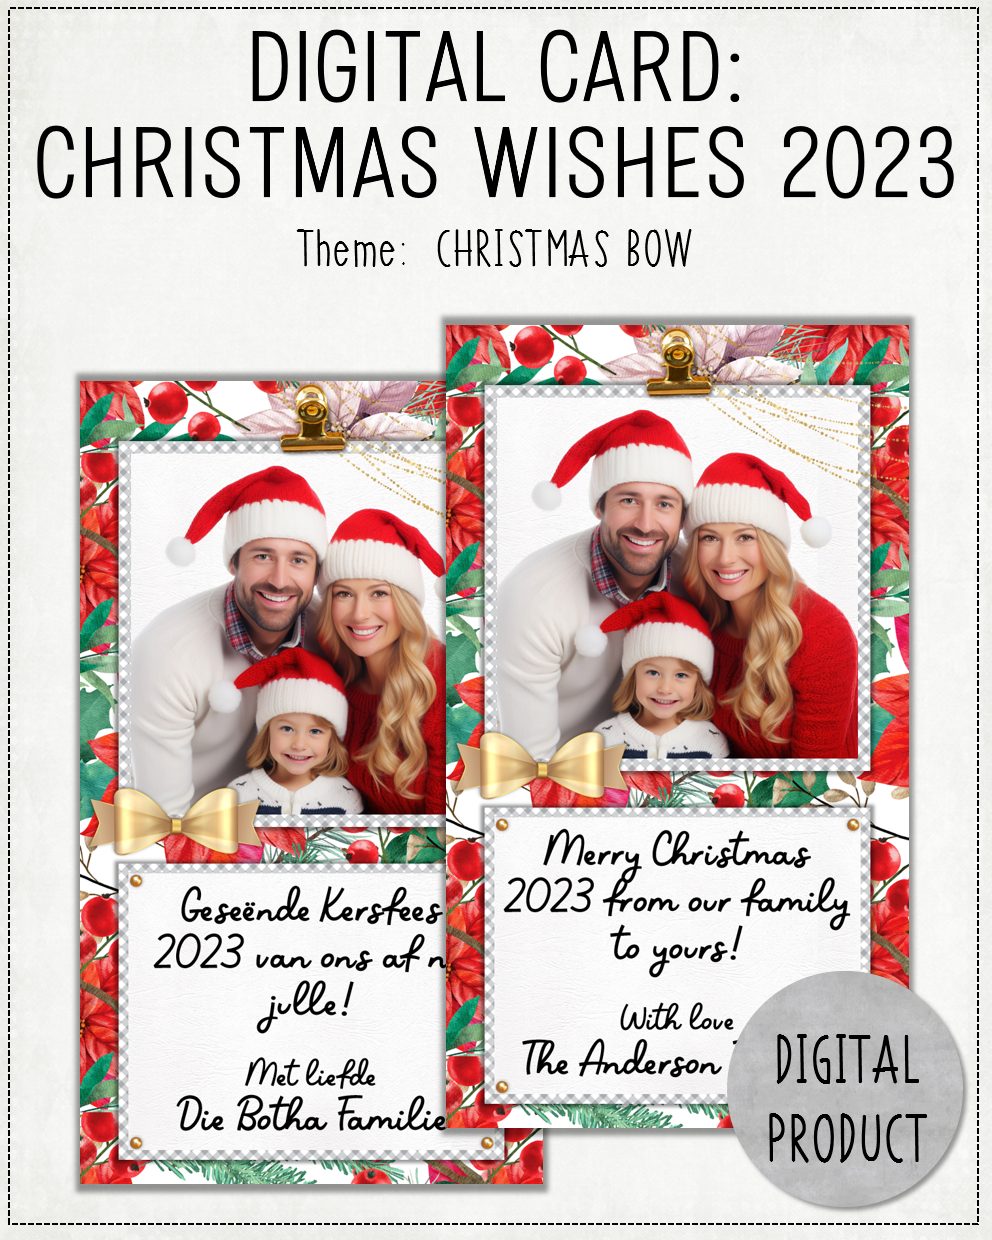 DIGITAL CARD:  Christmas Wishes 2023 - Christmas Bow (Afrikaans / English)